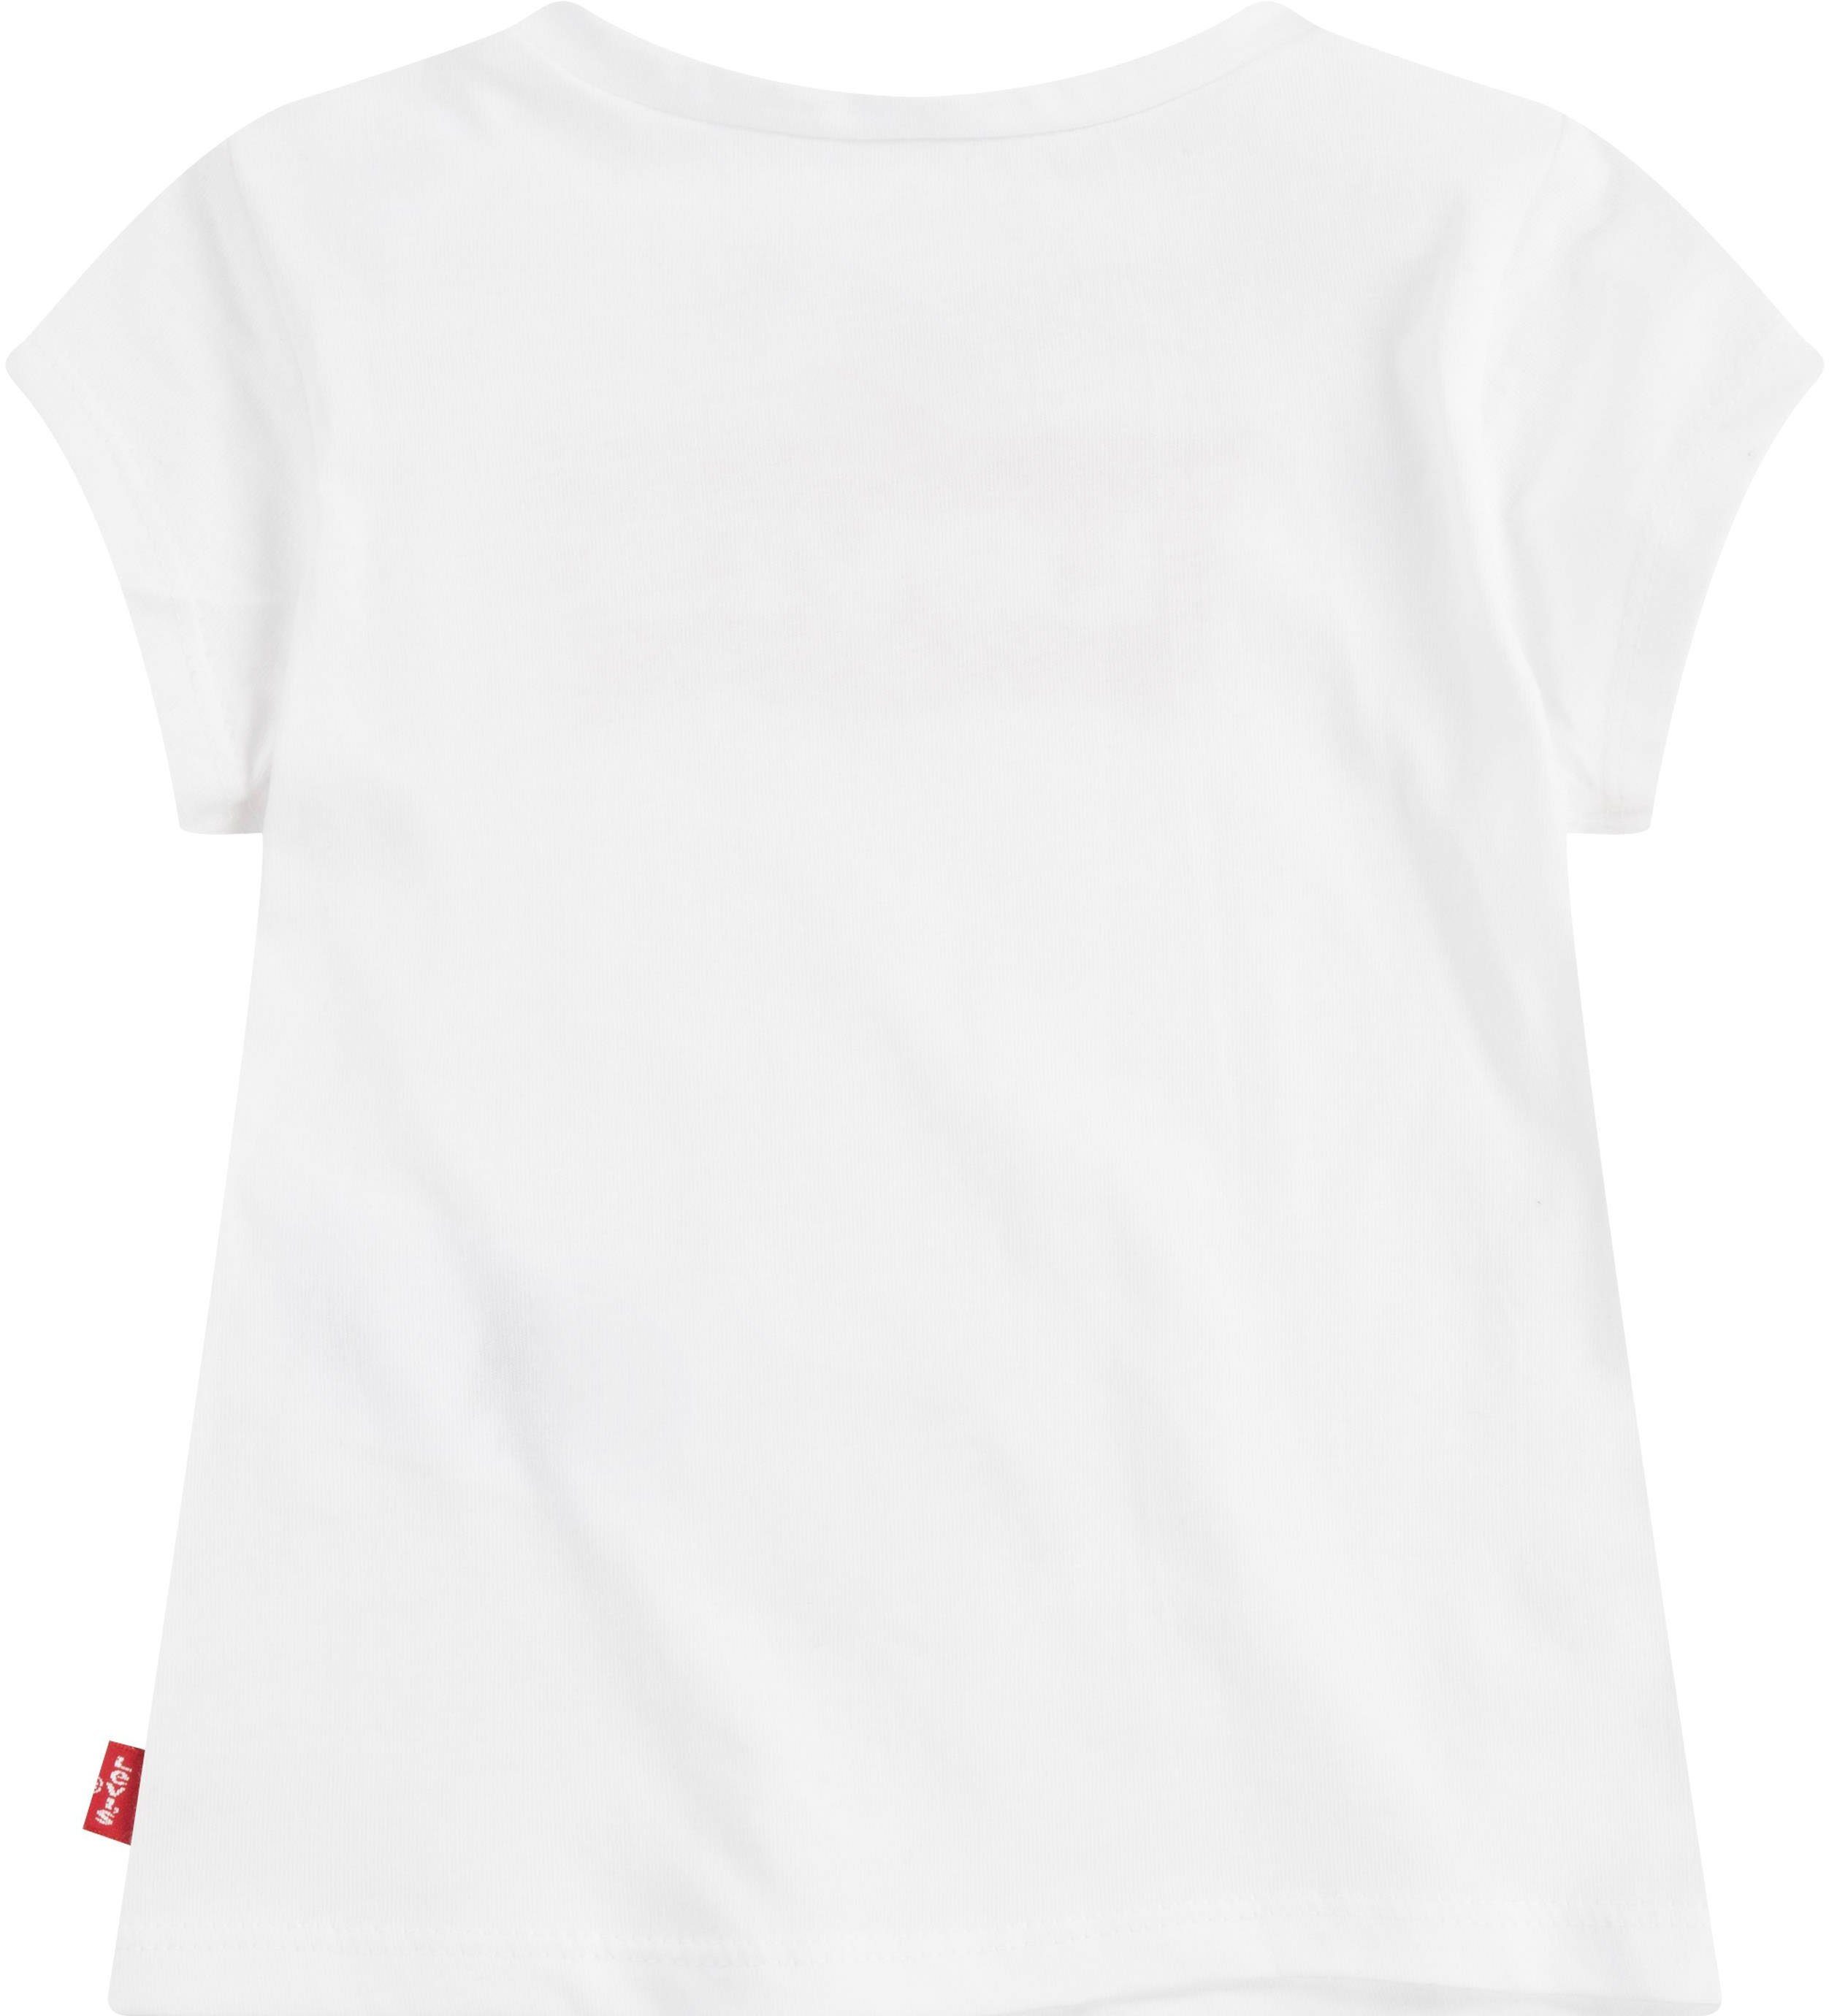 Levi's® Kids GIRLS T-Shirt TEE white/red BATWING for